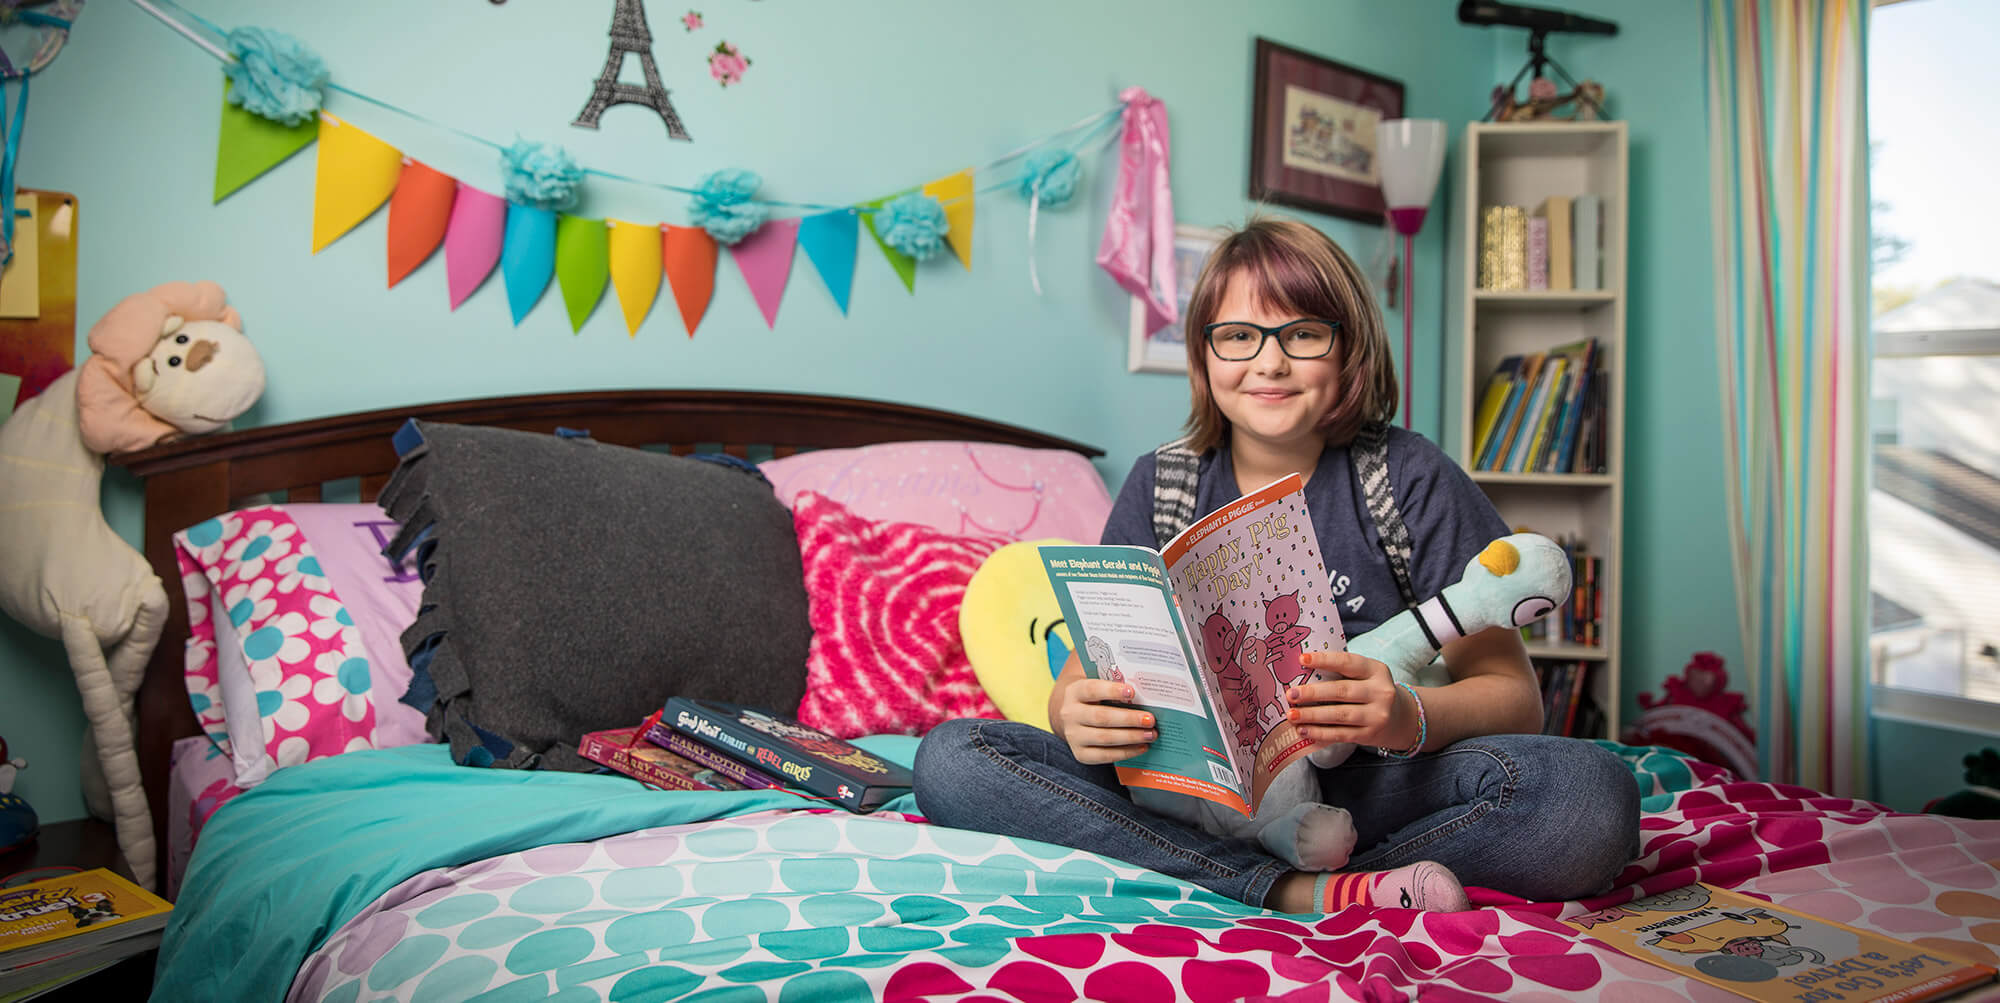 Girl sitting on a bed smiling and holding a book